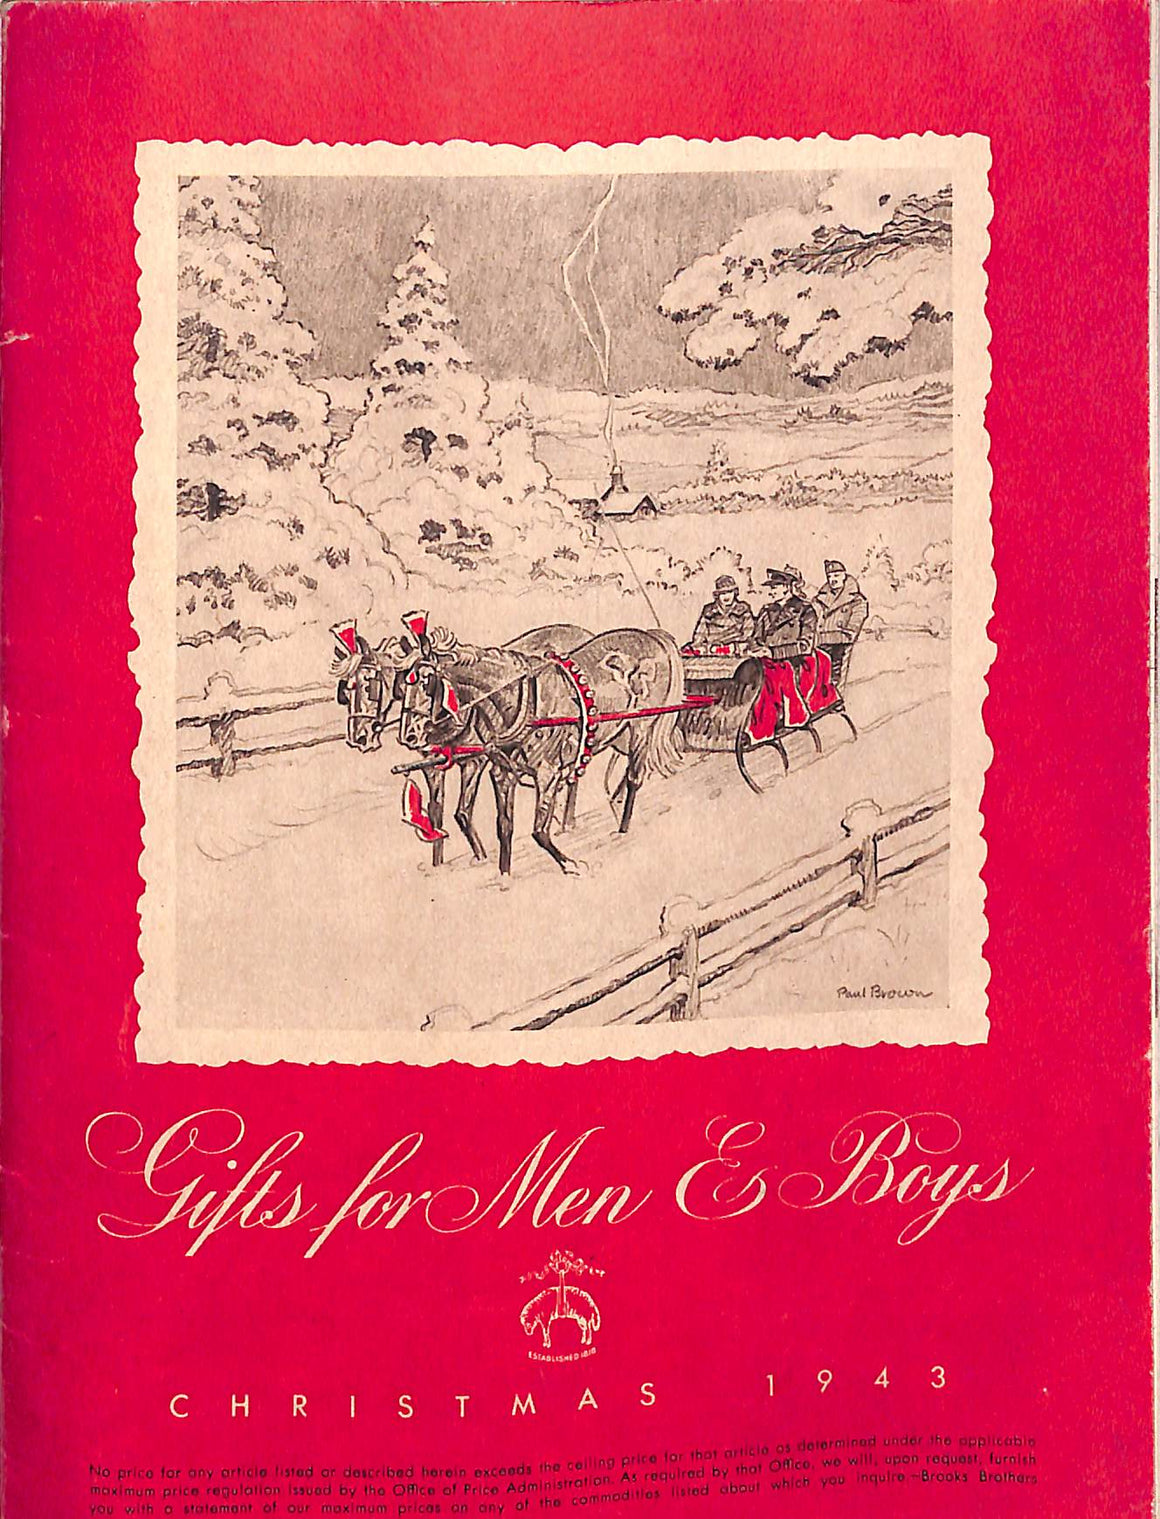 "Brooks Brothers Gifts For Men & Boys Christmas 1943 Catalog"